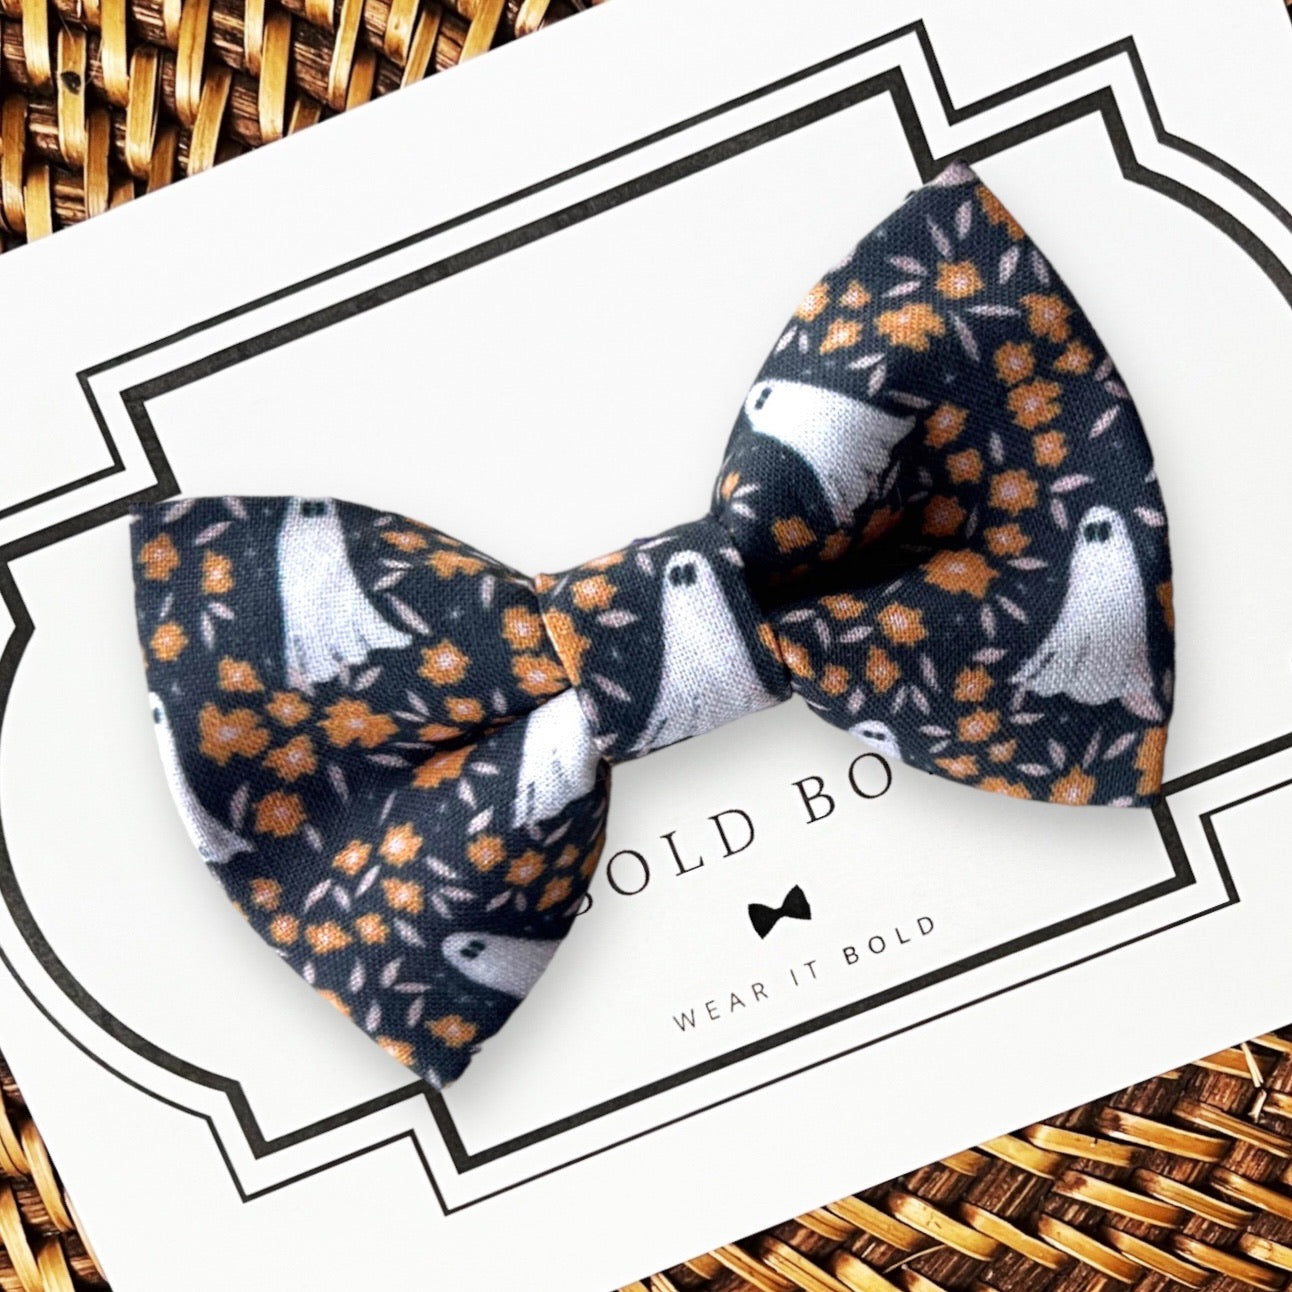 Marigold Ghosts Bow Tie for Dog Collar or Cat Collar